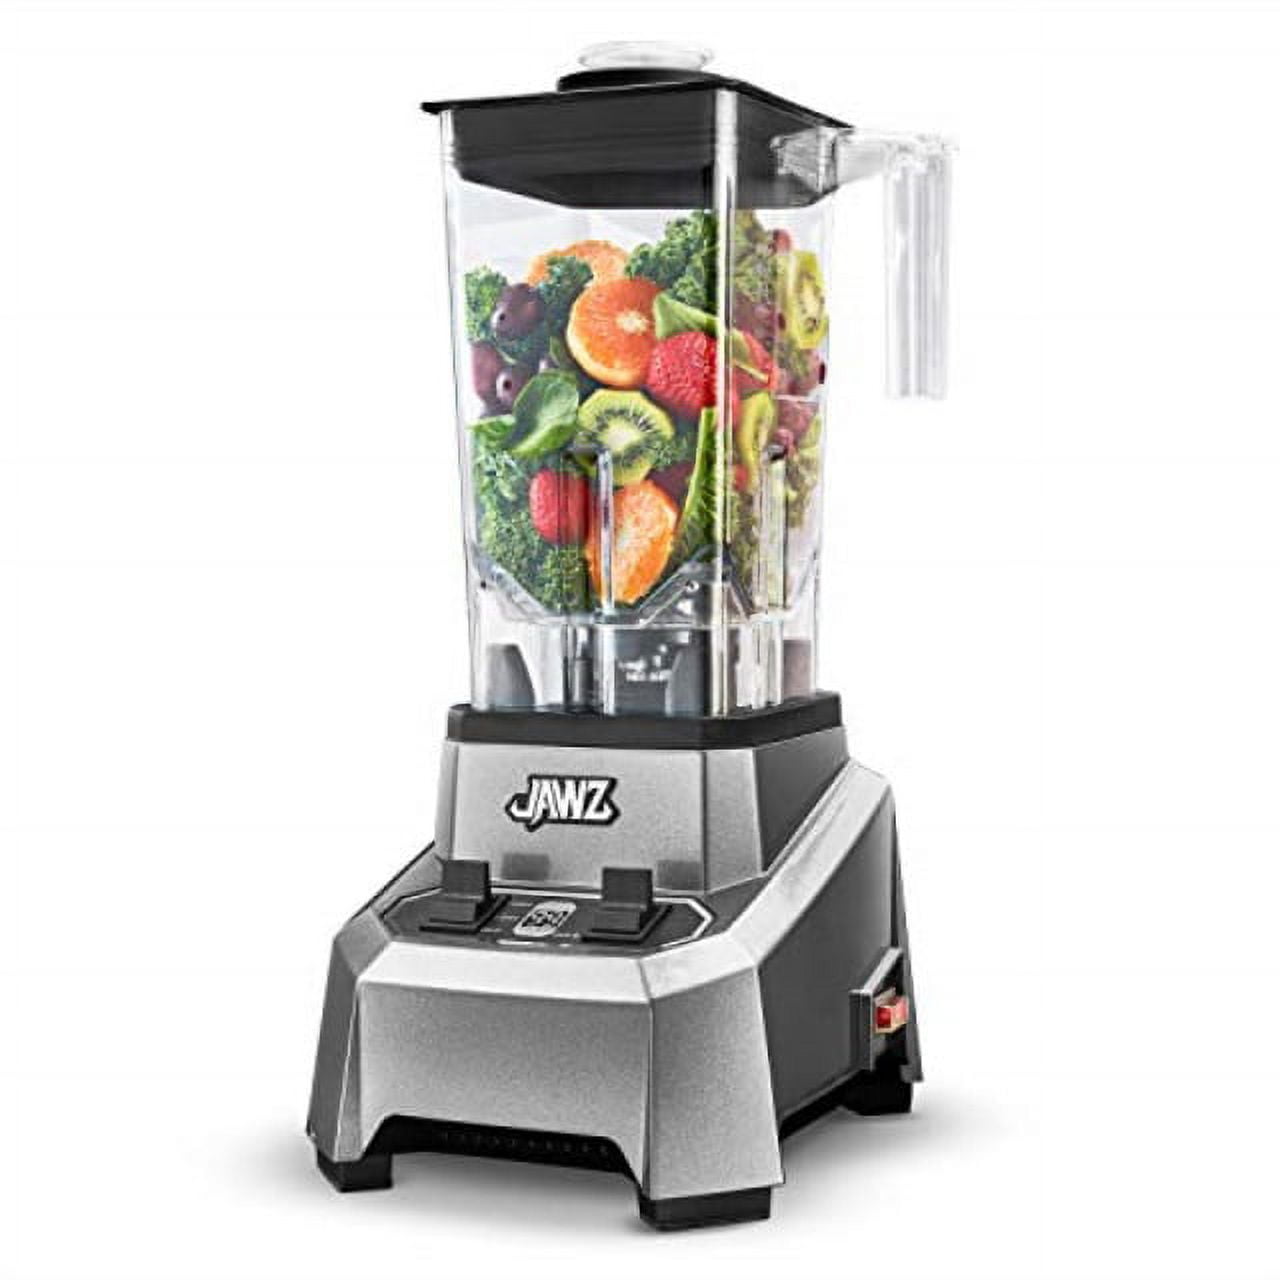 61oz 4 in 1 Blender and Food Processor Combo for Kitchen Large Capacity  Countertop Blenders for Smoothies, Shakes with 3 Cups 2 speed Electric  Mixer